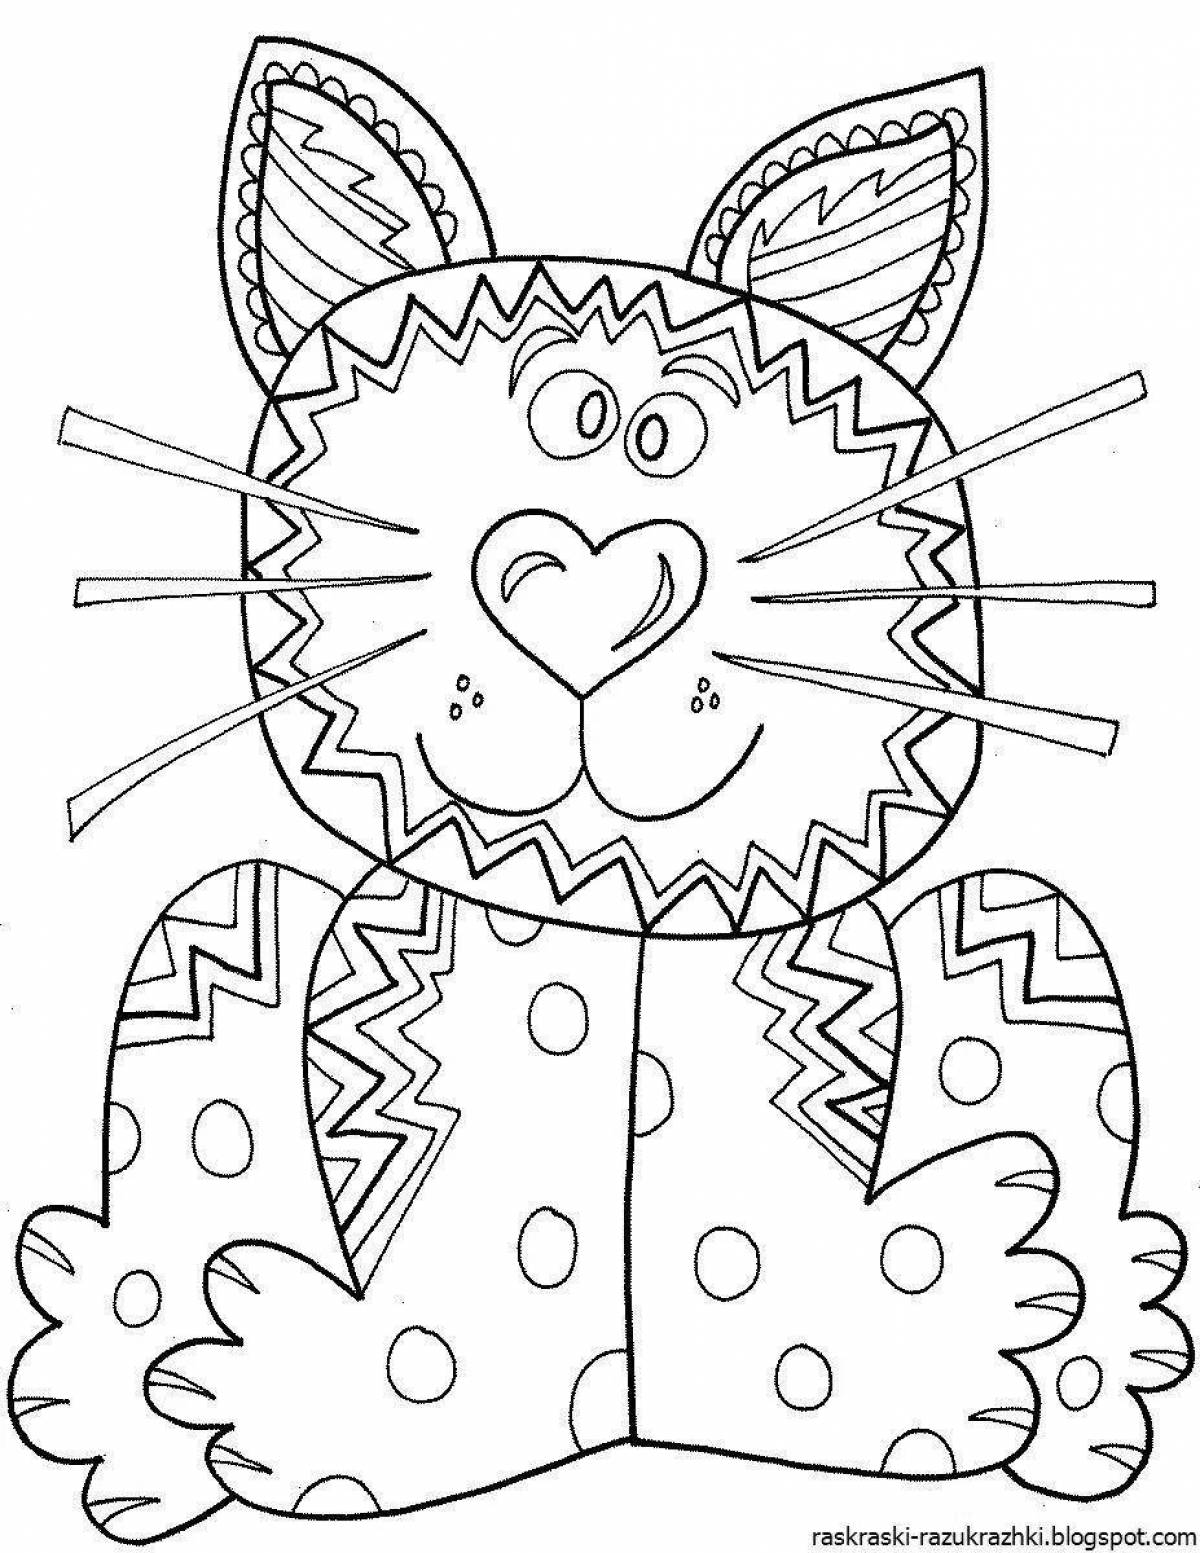 Relaxing anti-stress coloring book for children 5-6 years old